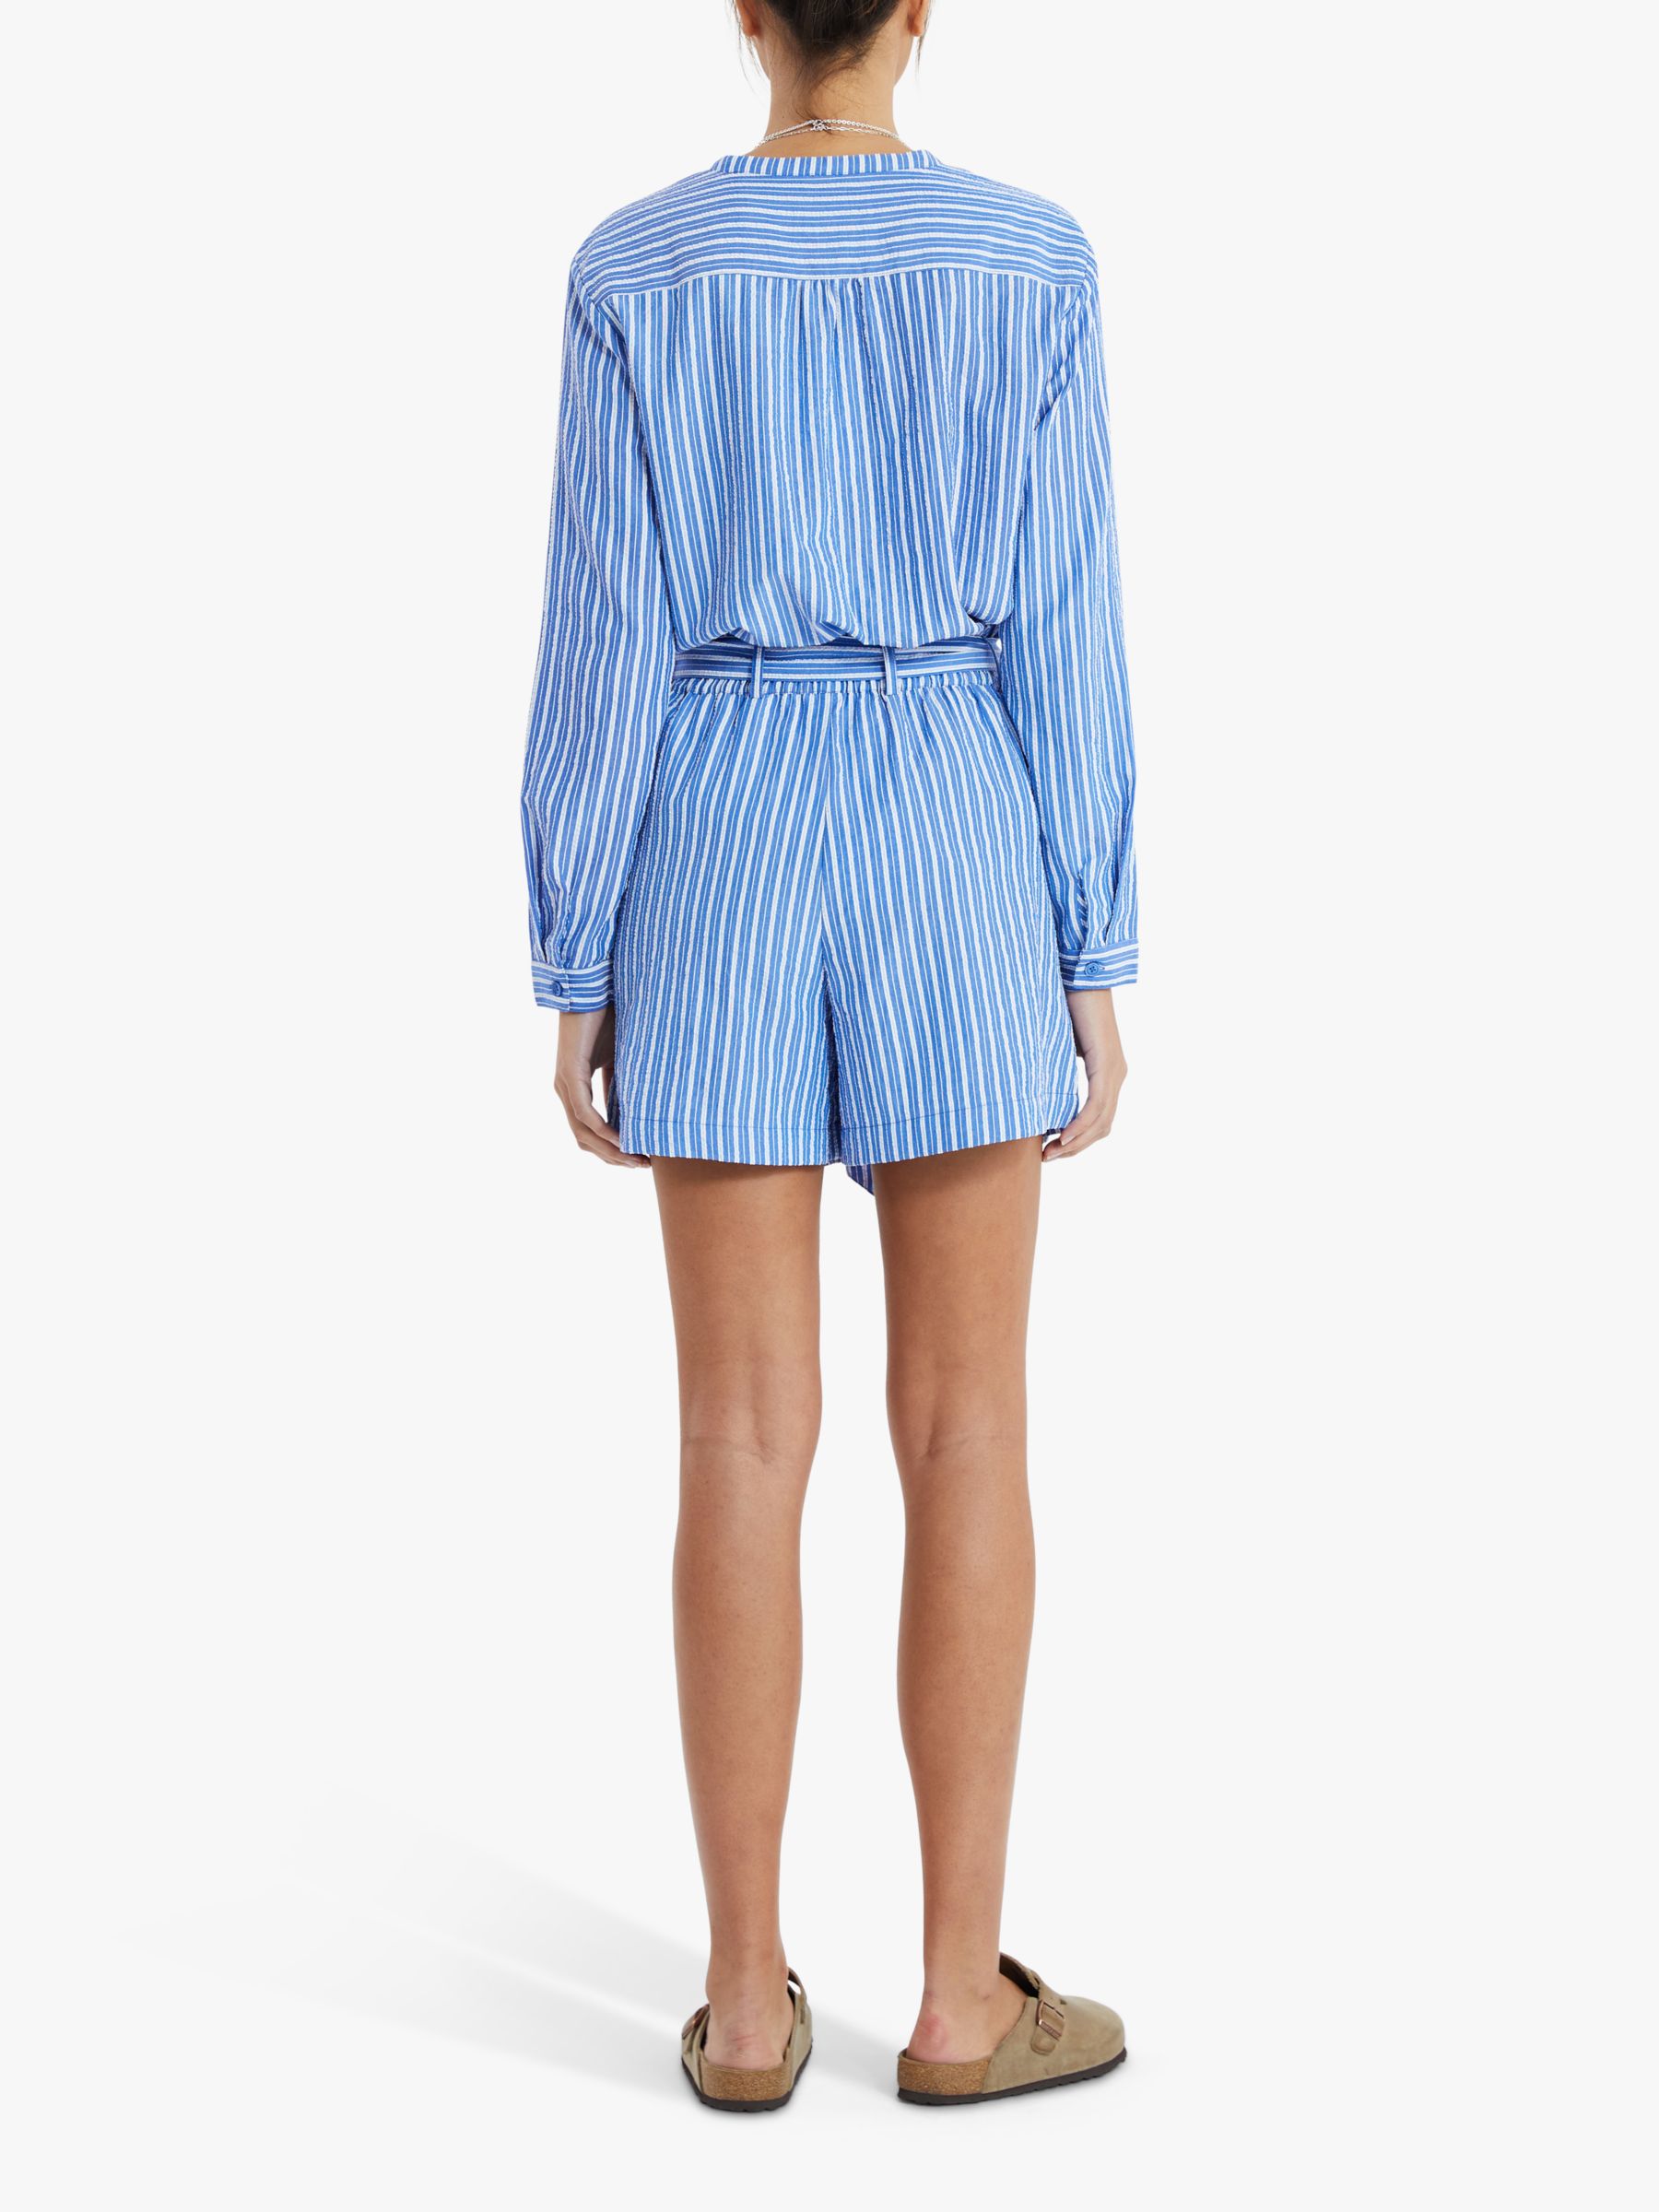 Buy Lollys Laundry Striped Blanca Shorts, Blue Online at johnlewis.com